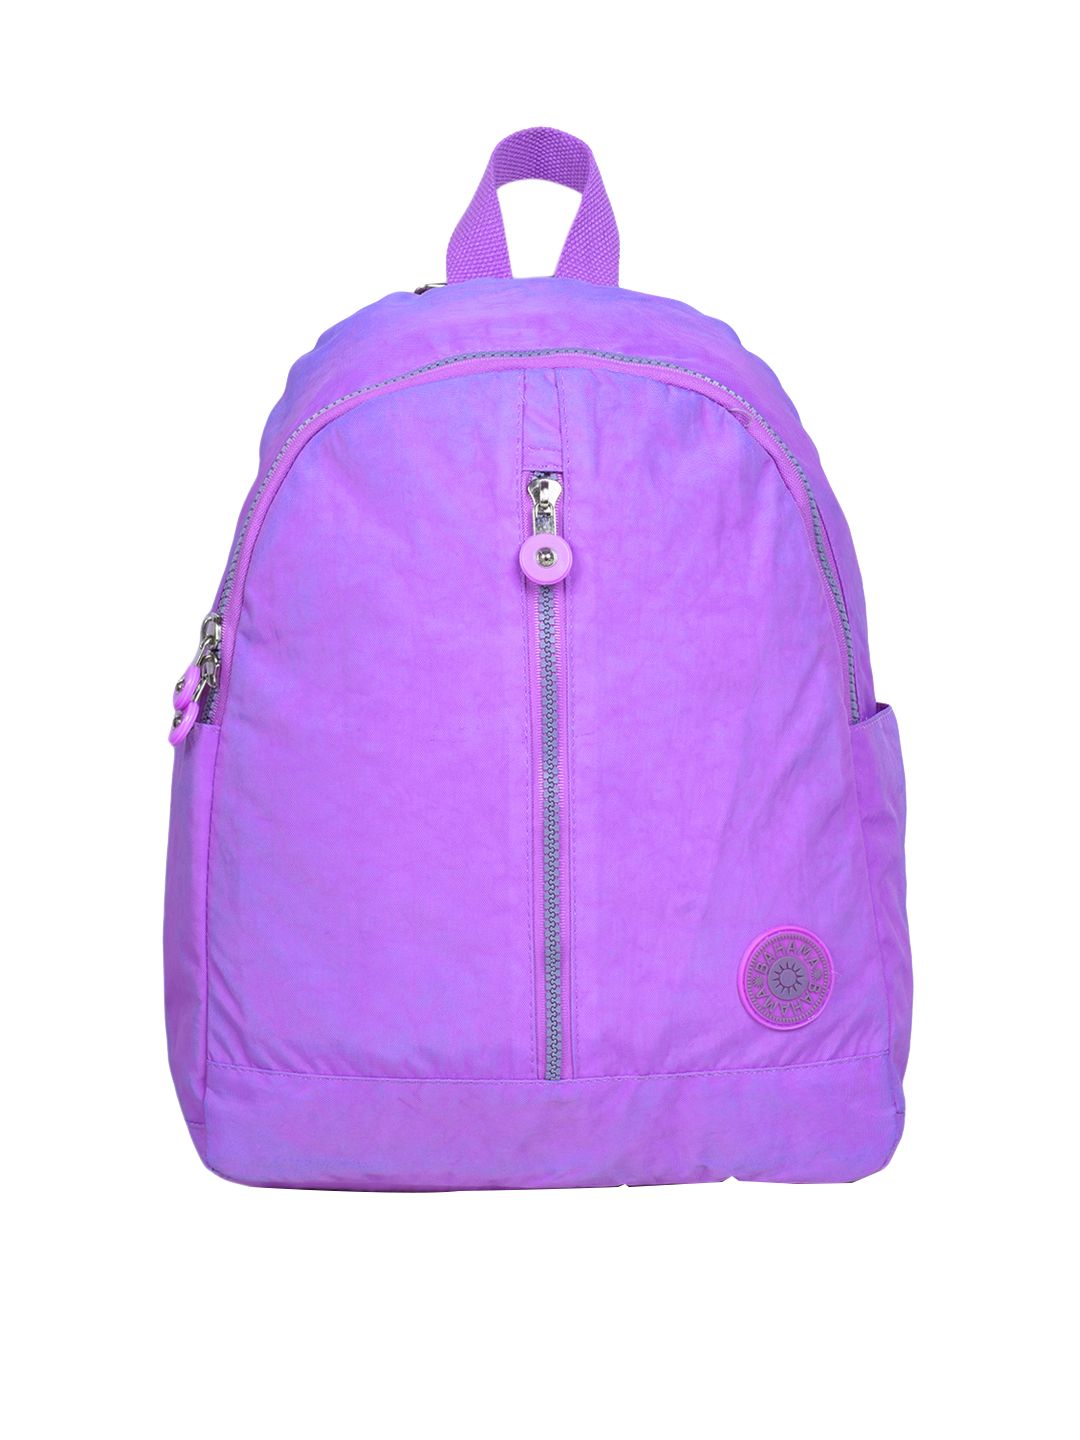 BAHAMA Unisex Purple Solid Backpack Price in India